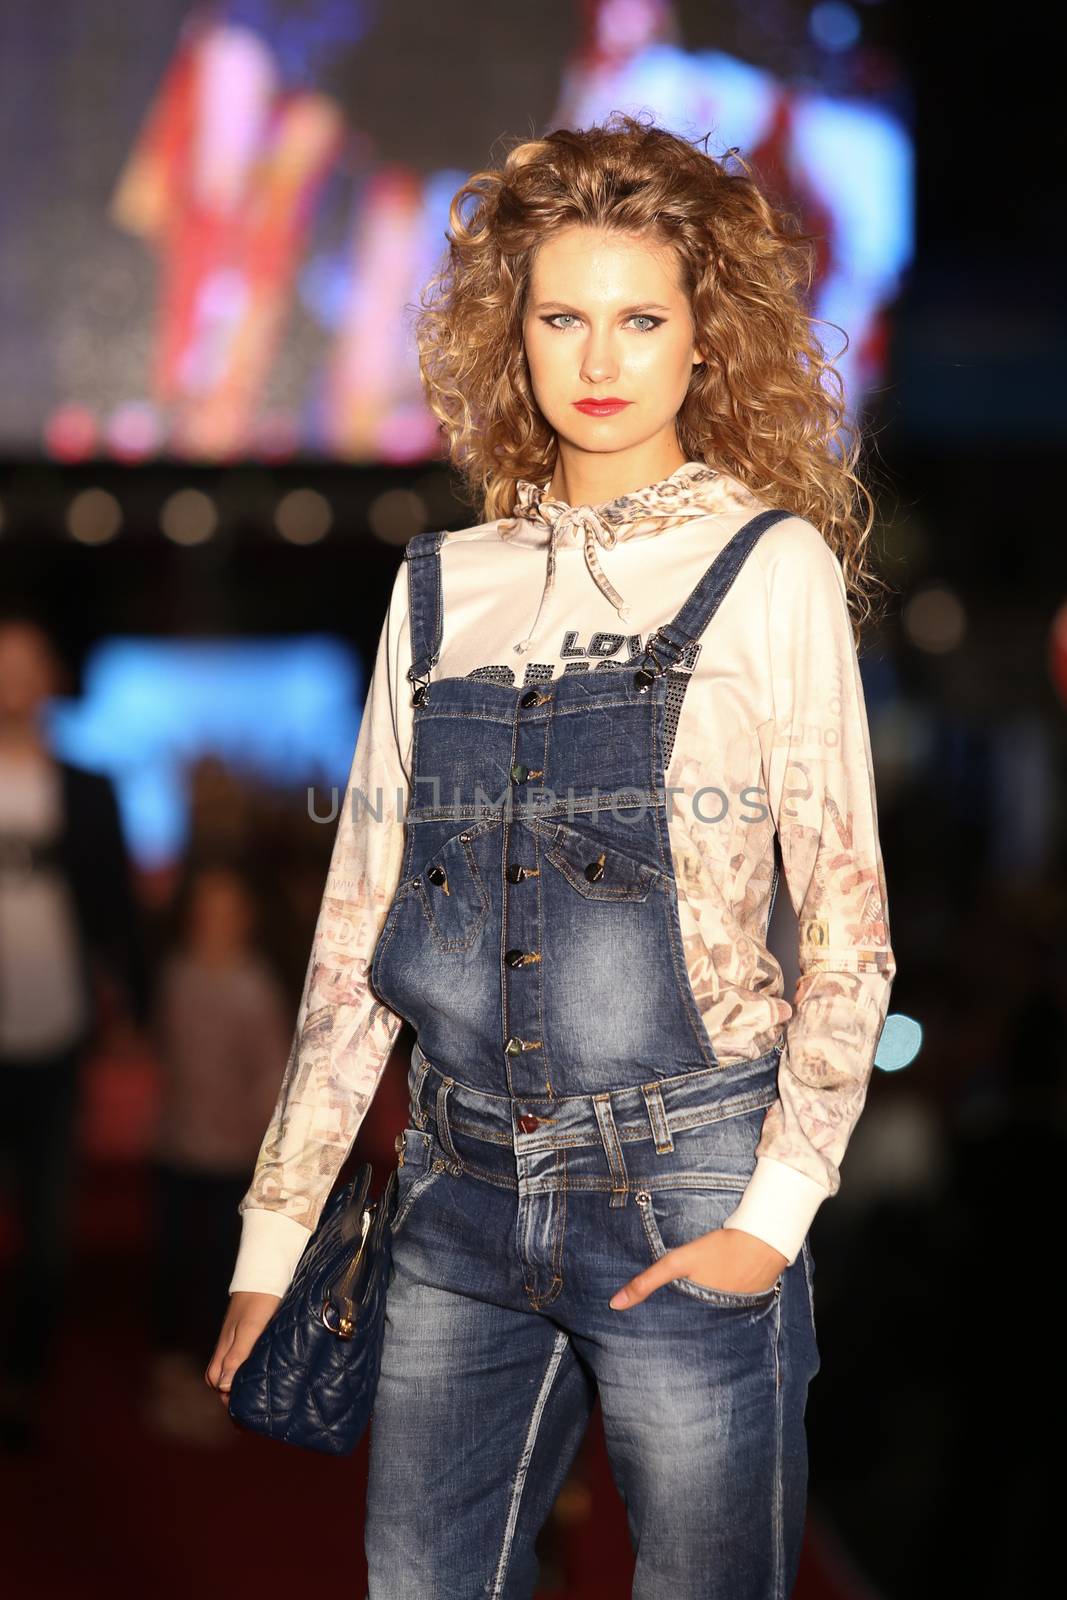 ISTANBUL, TURKEY - AUGUST 25, 2015: A model showcases one of the latest creations in Laleli Fashion Shopping Festival